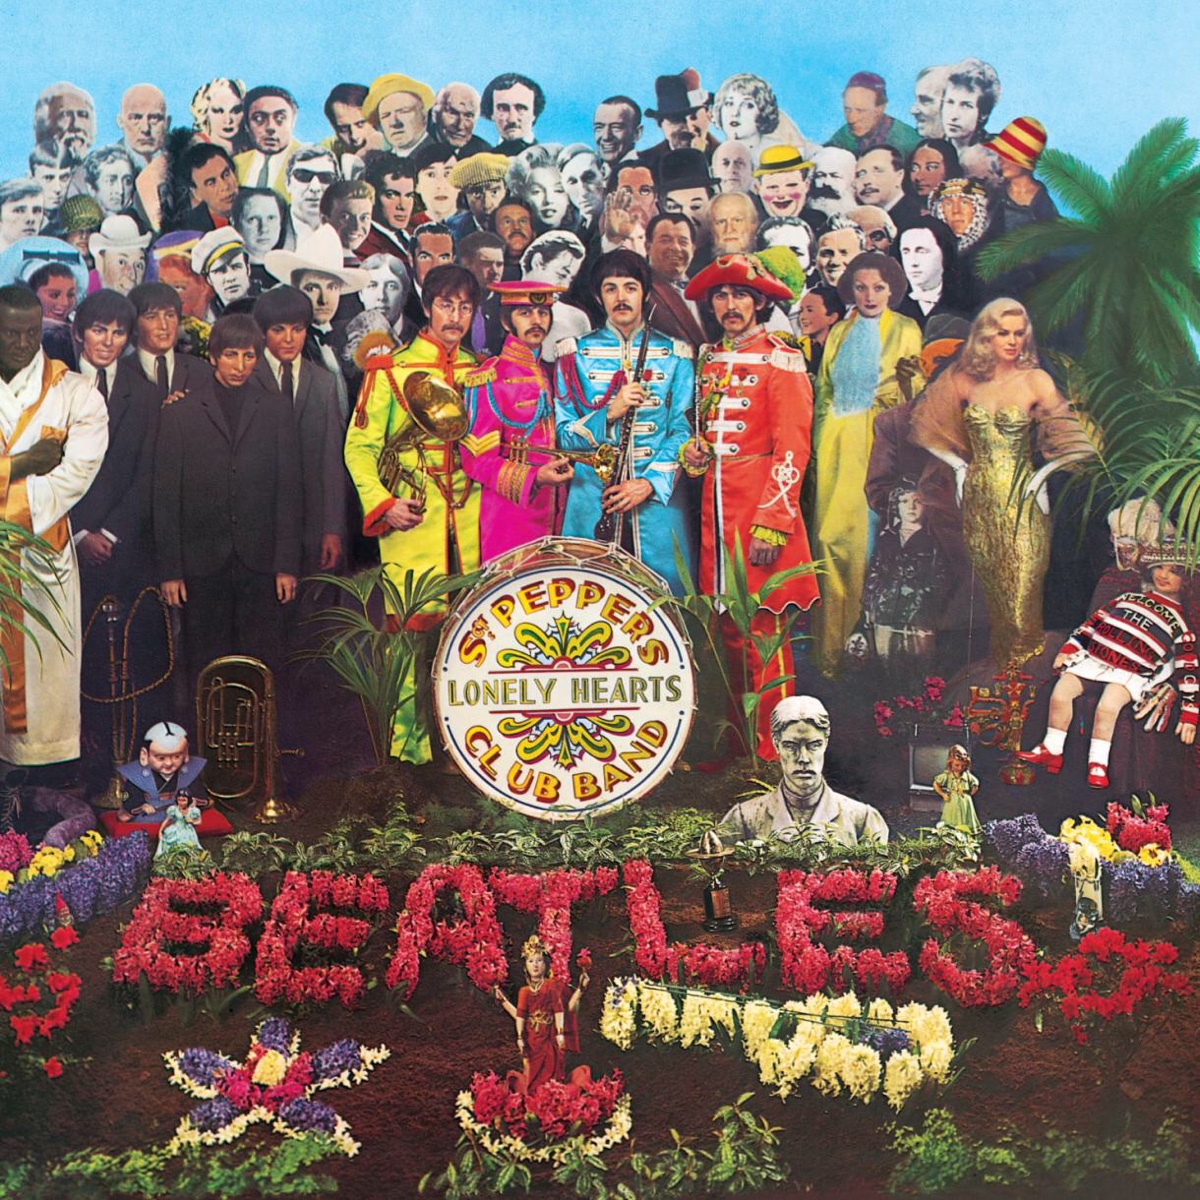 Sgt. Pepper's Lonely Hearts Club Band cover.